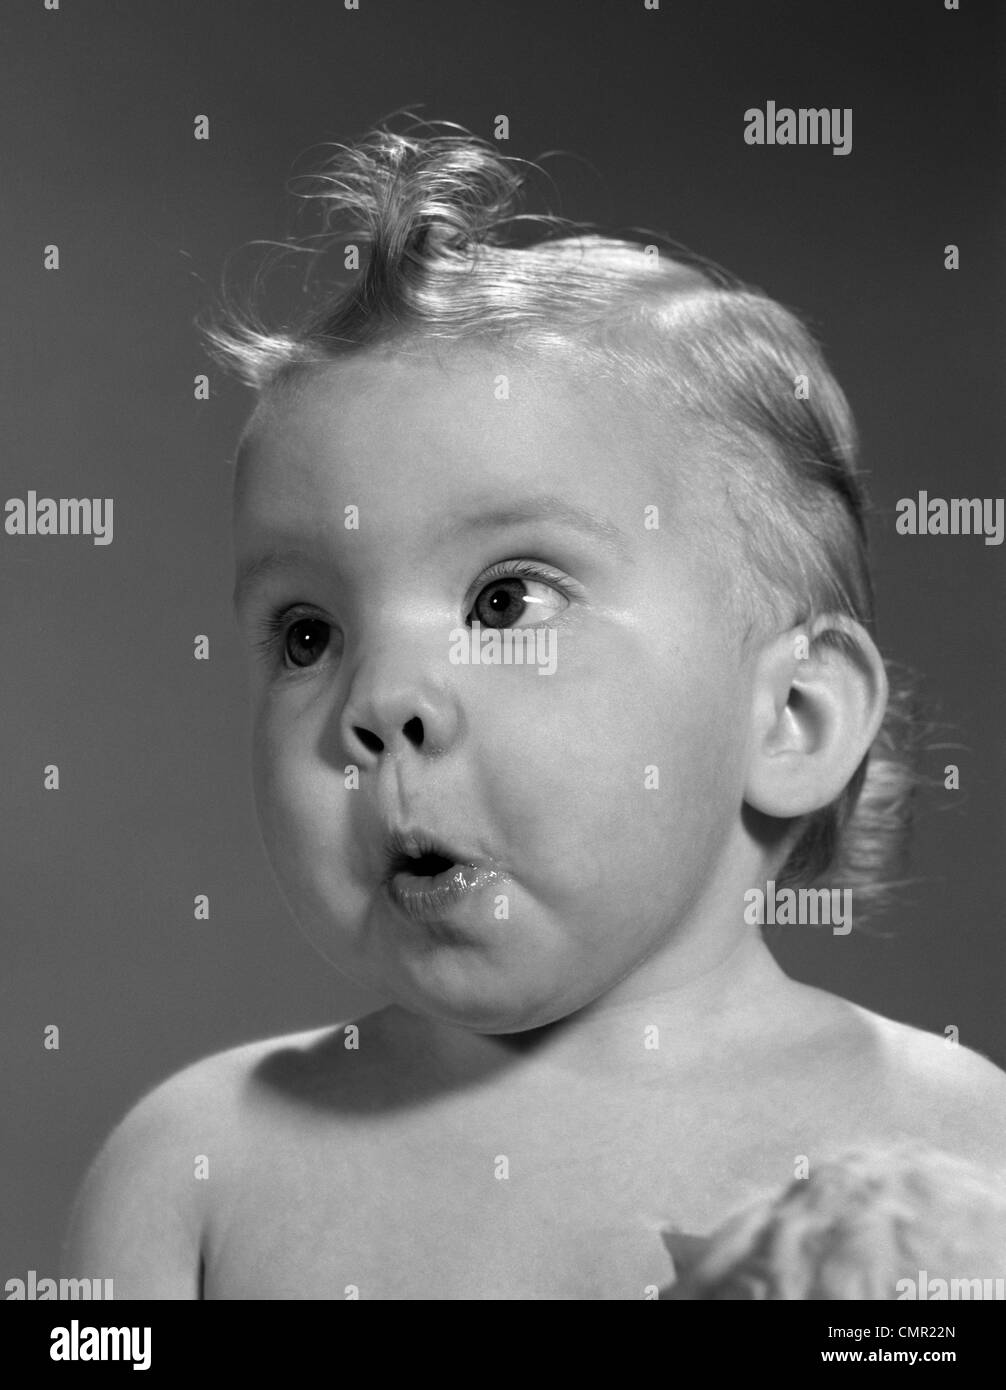 1960s HEAD SHOT OF BABY WITH SURPRISED EXPRESSION Stock Photo